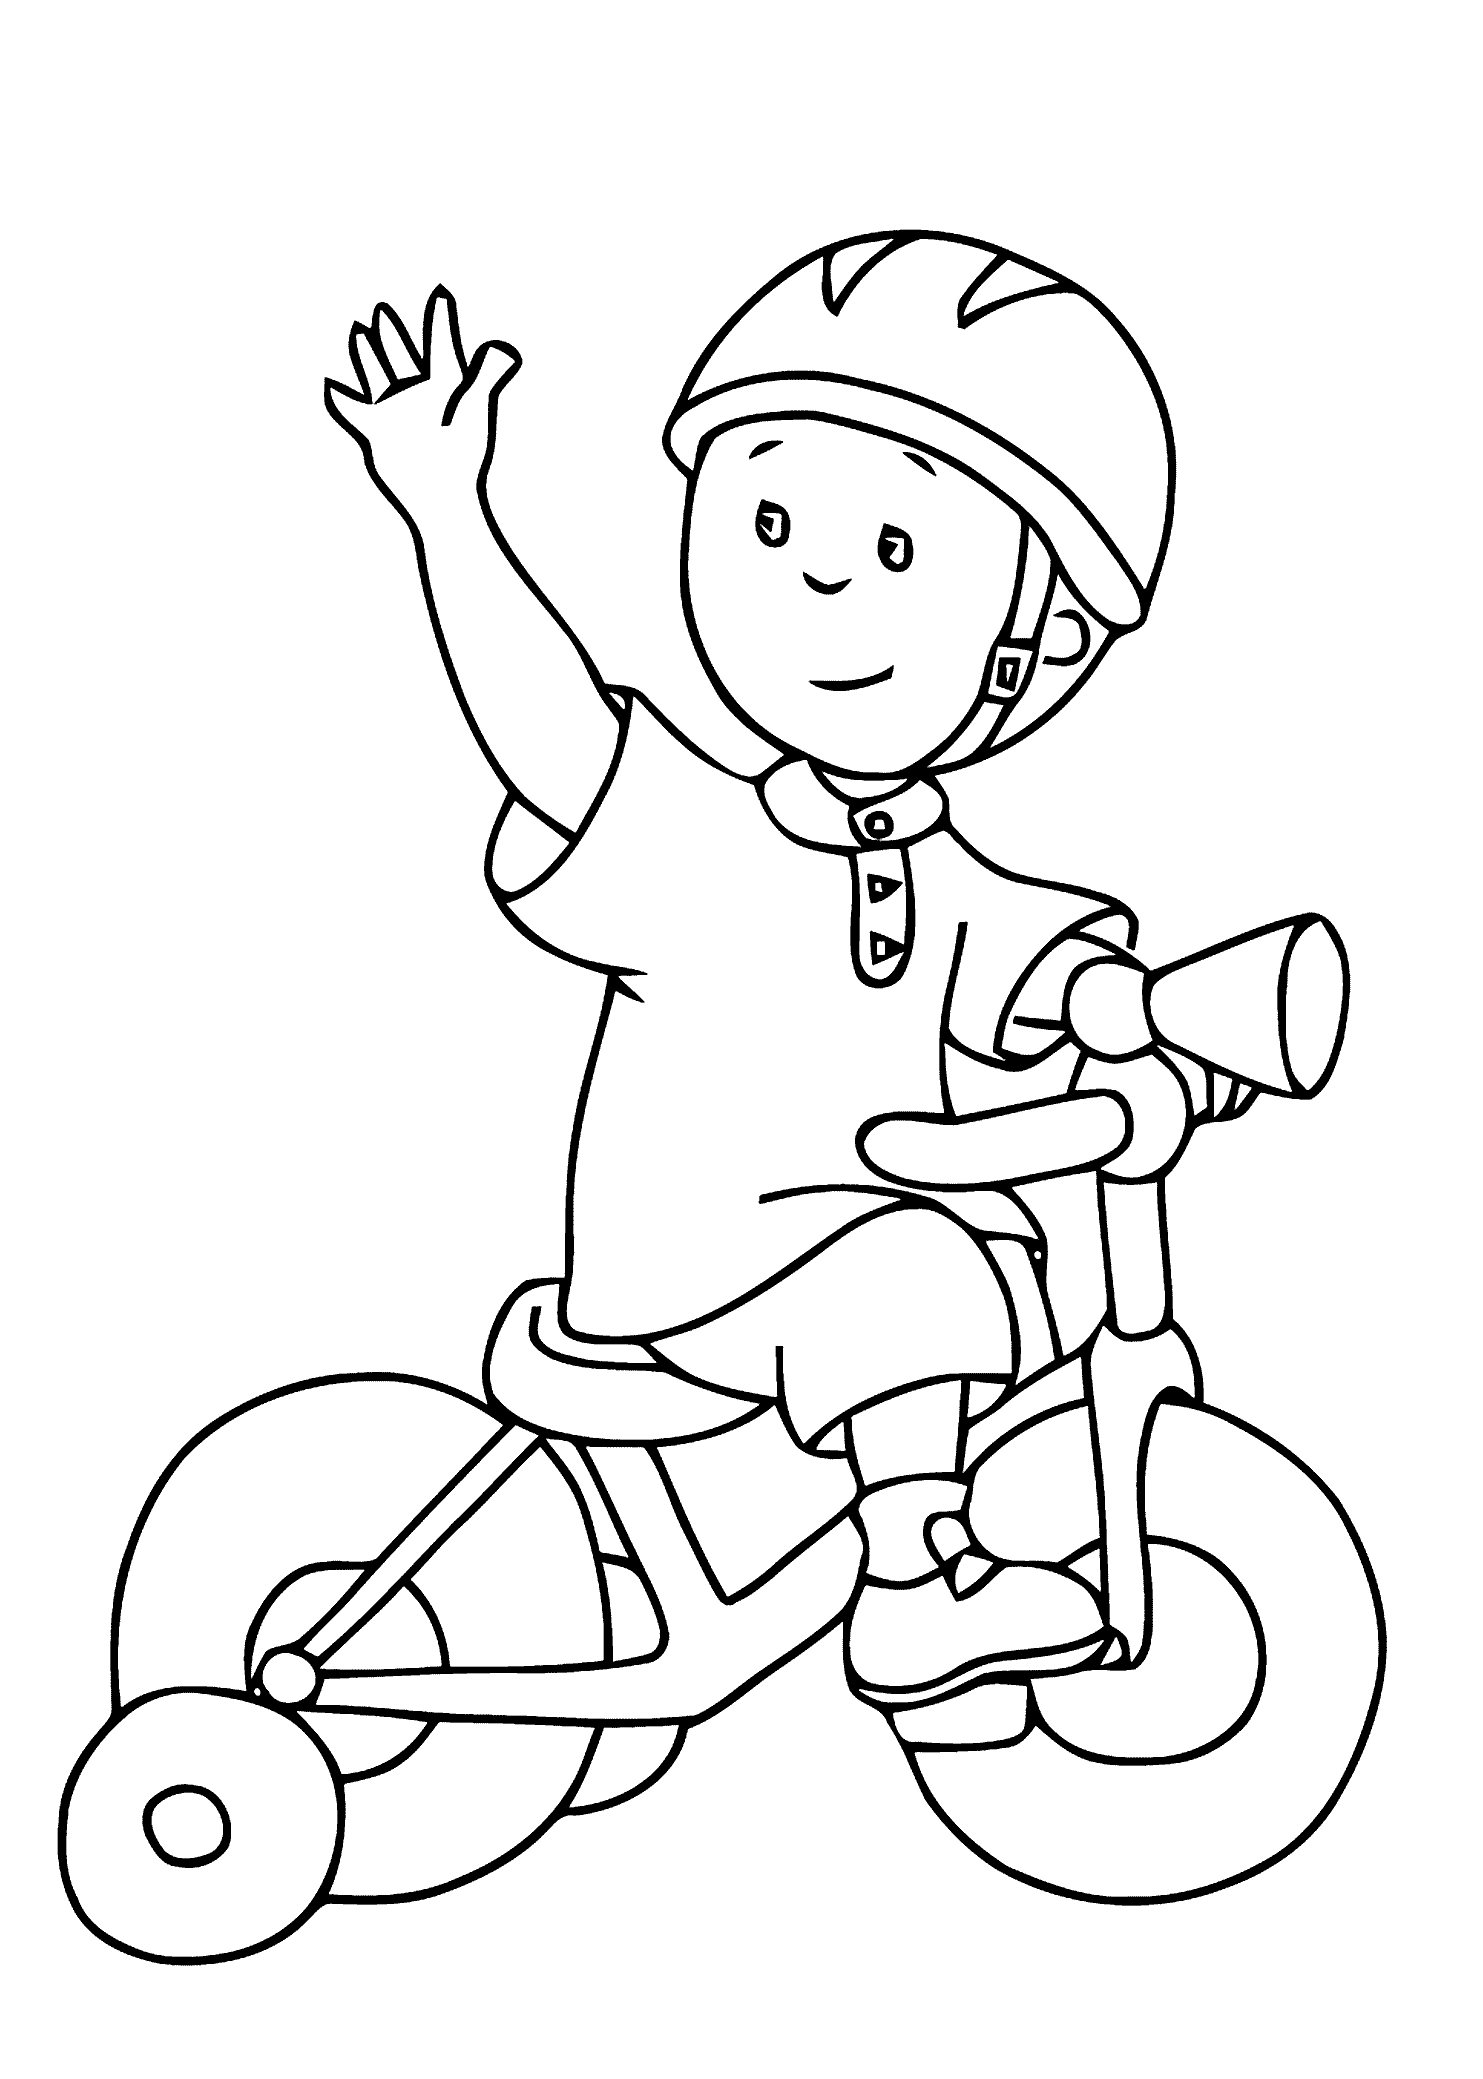 12 coloring pages of caillou - Print Color Craft